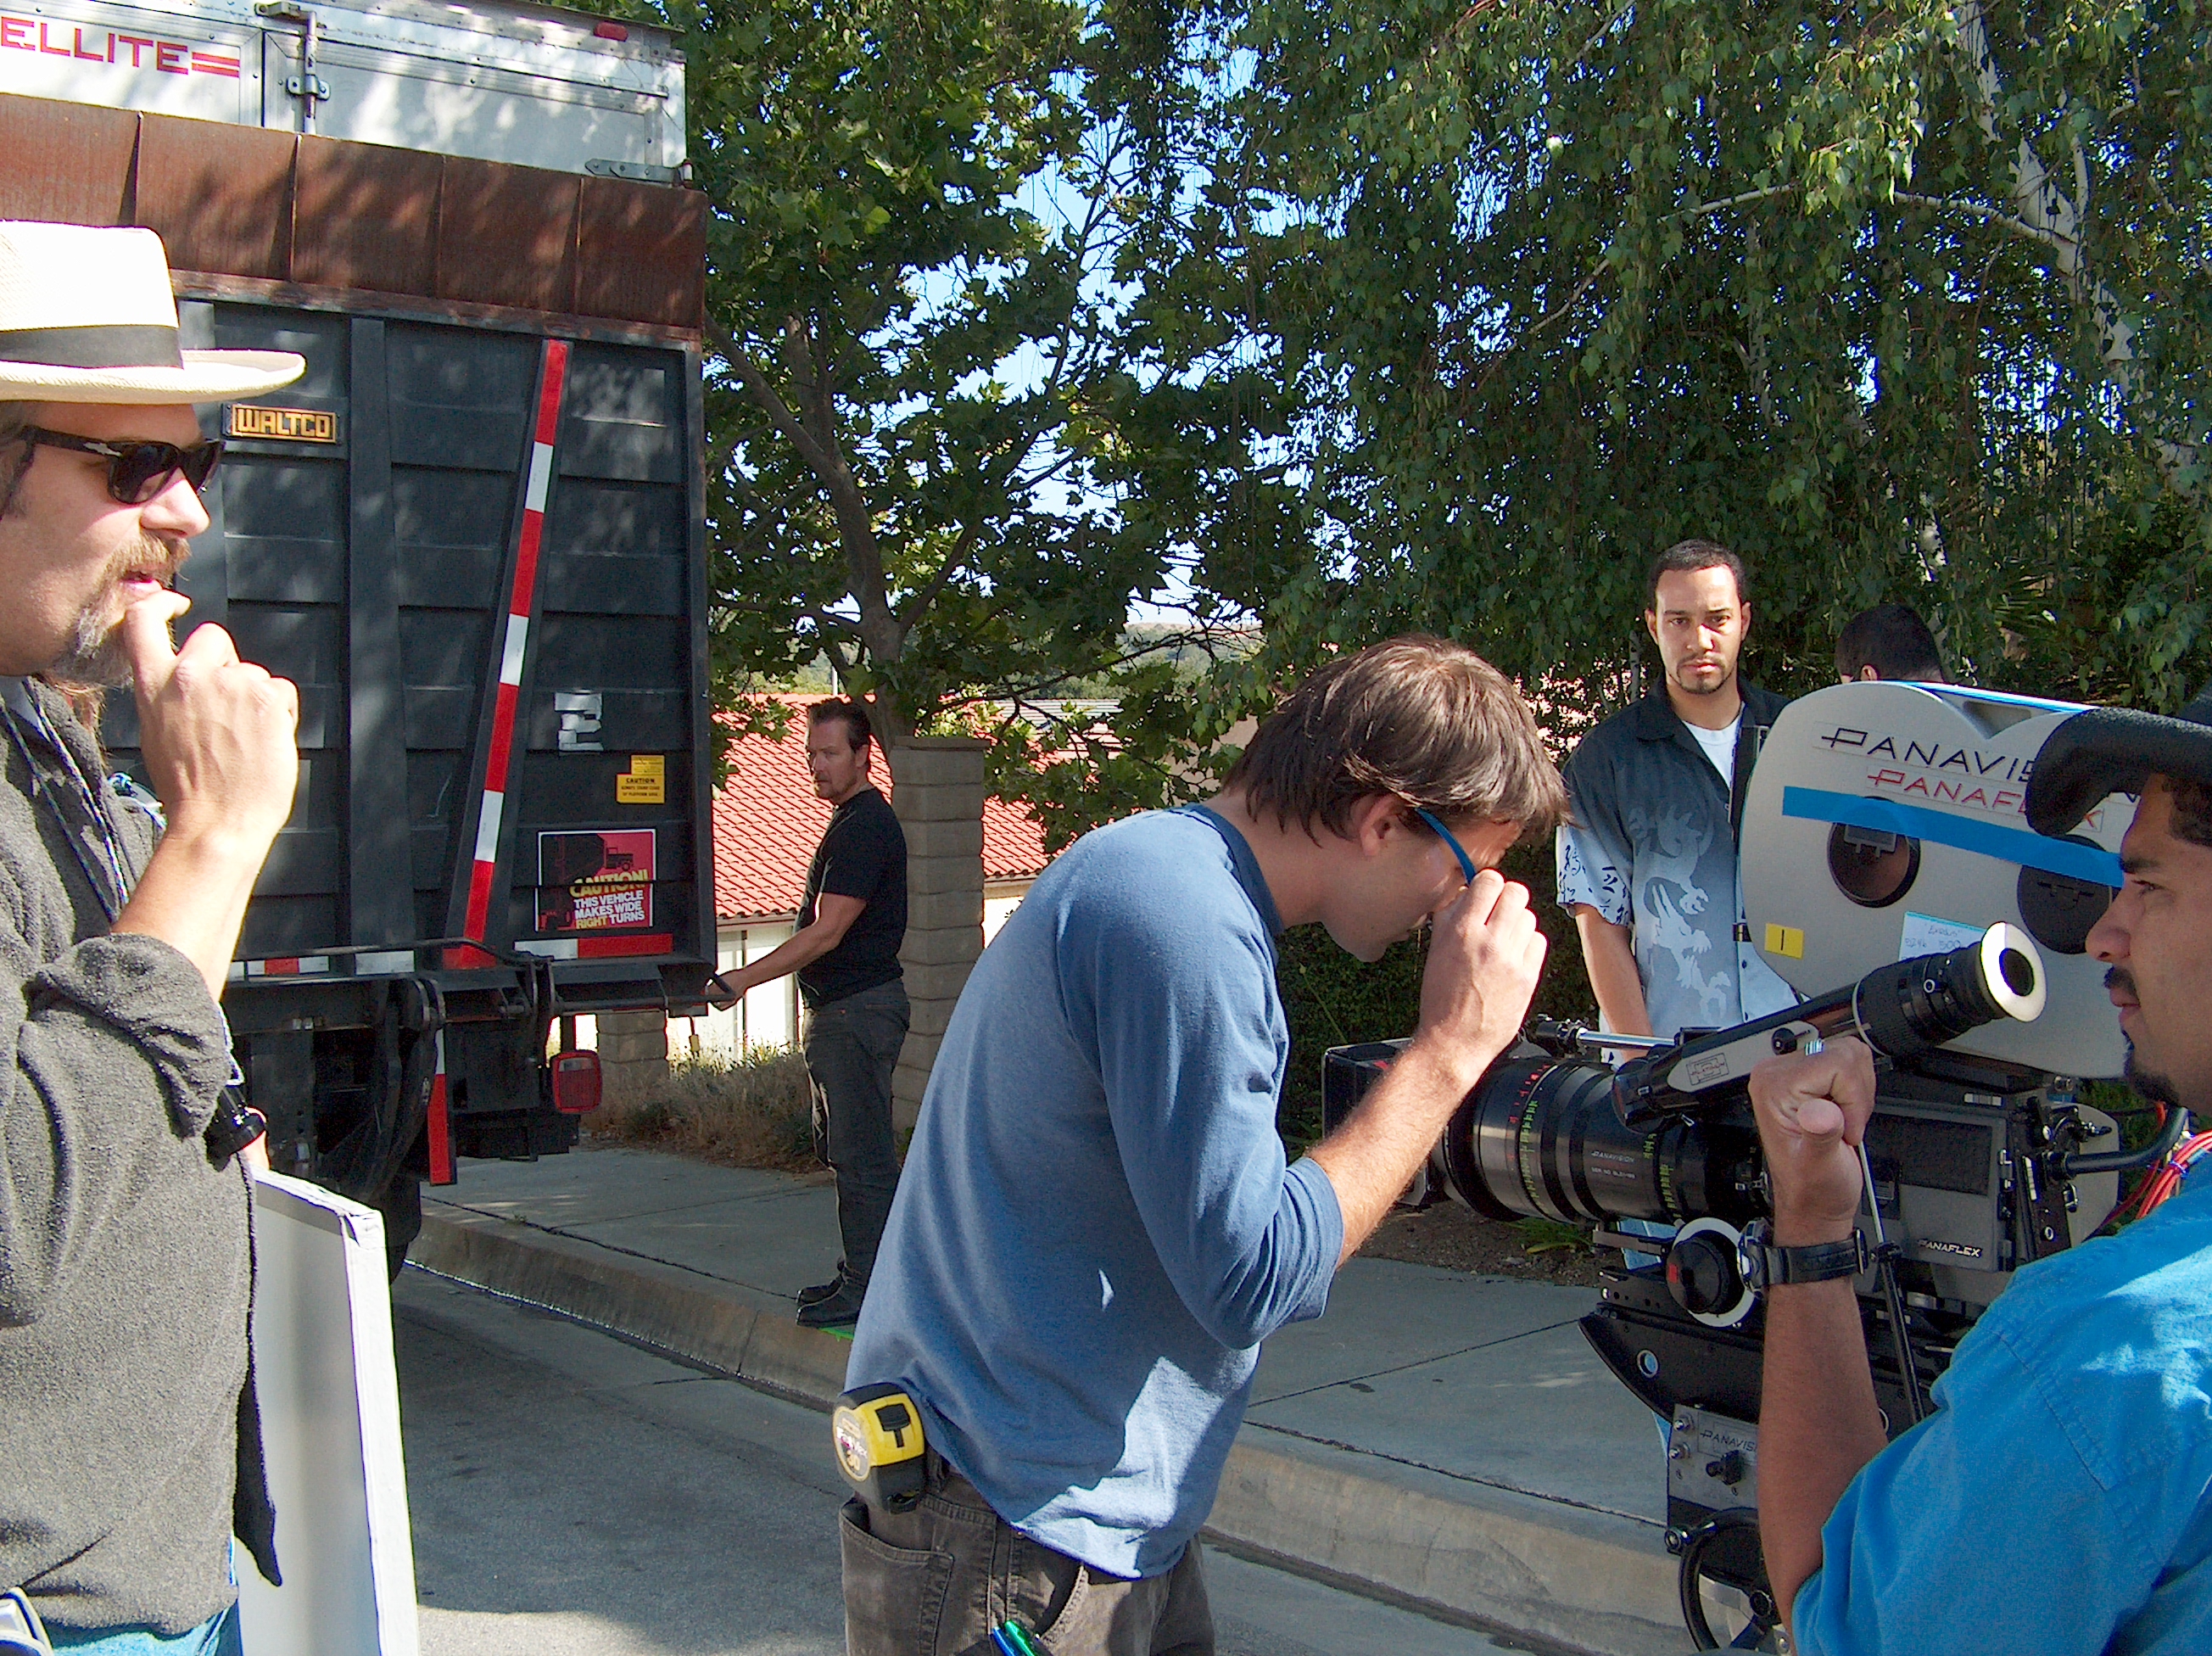 Directing Film THE EXODUS: On set behind the scenes